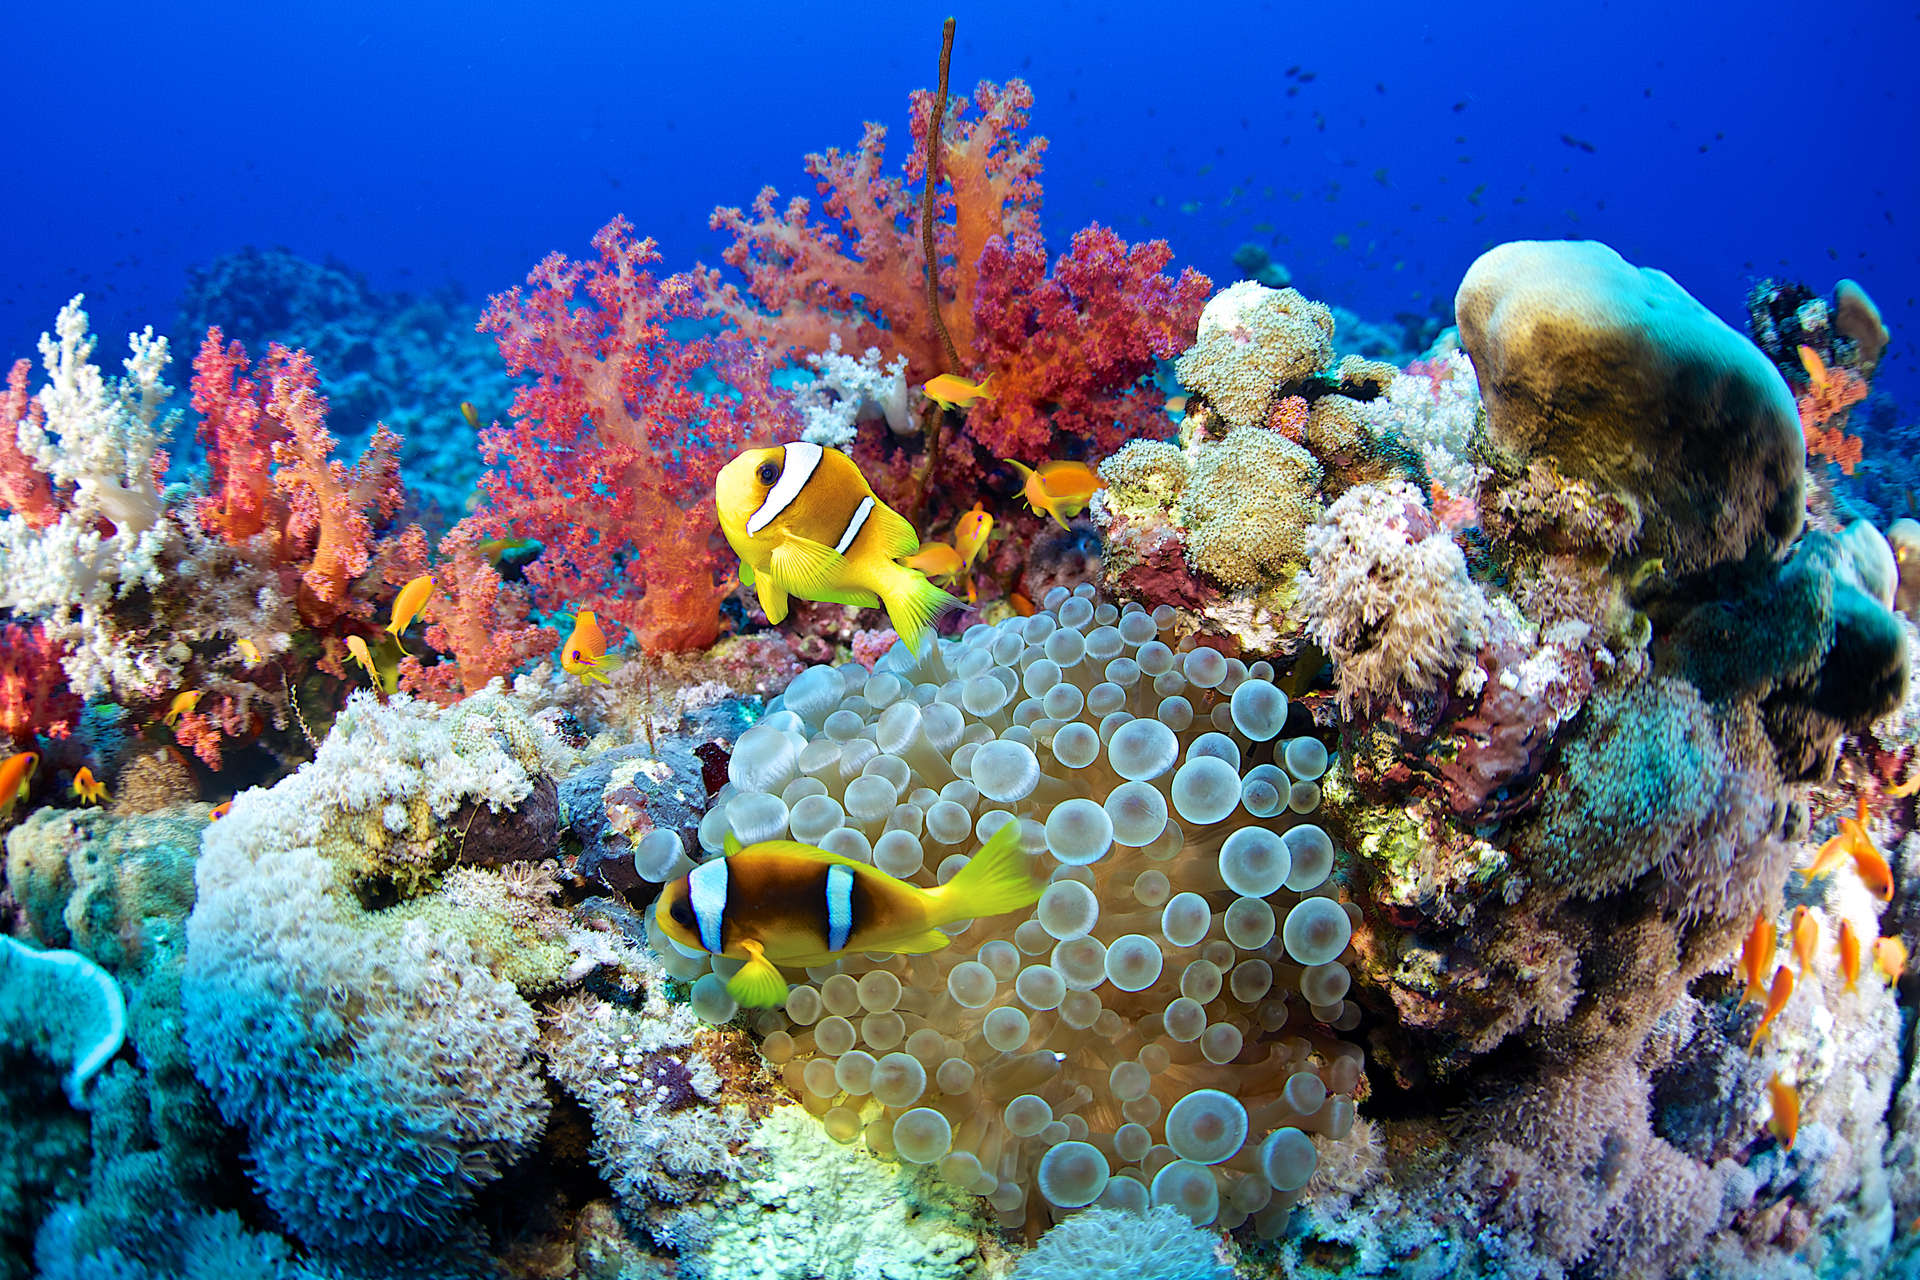 The Red Sea offers spectacular diving